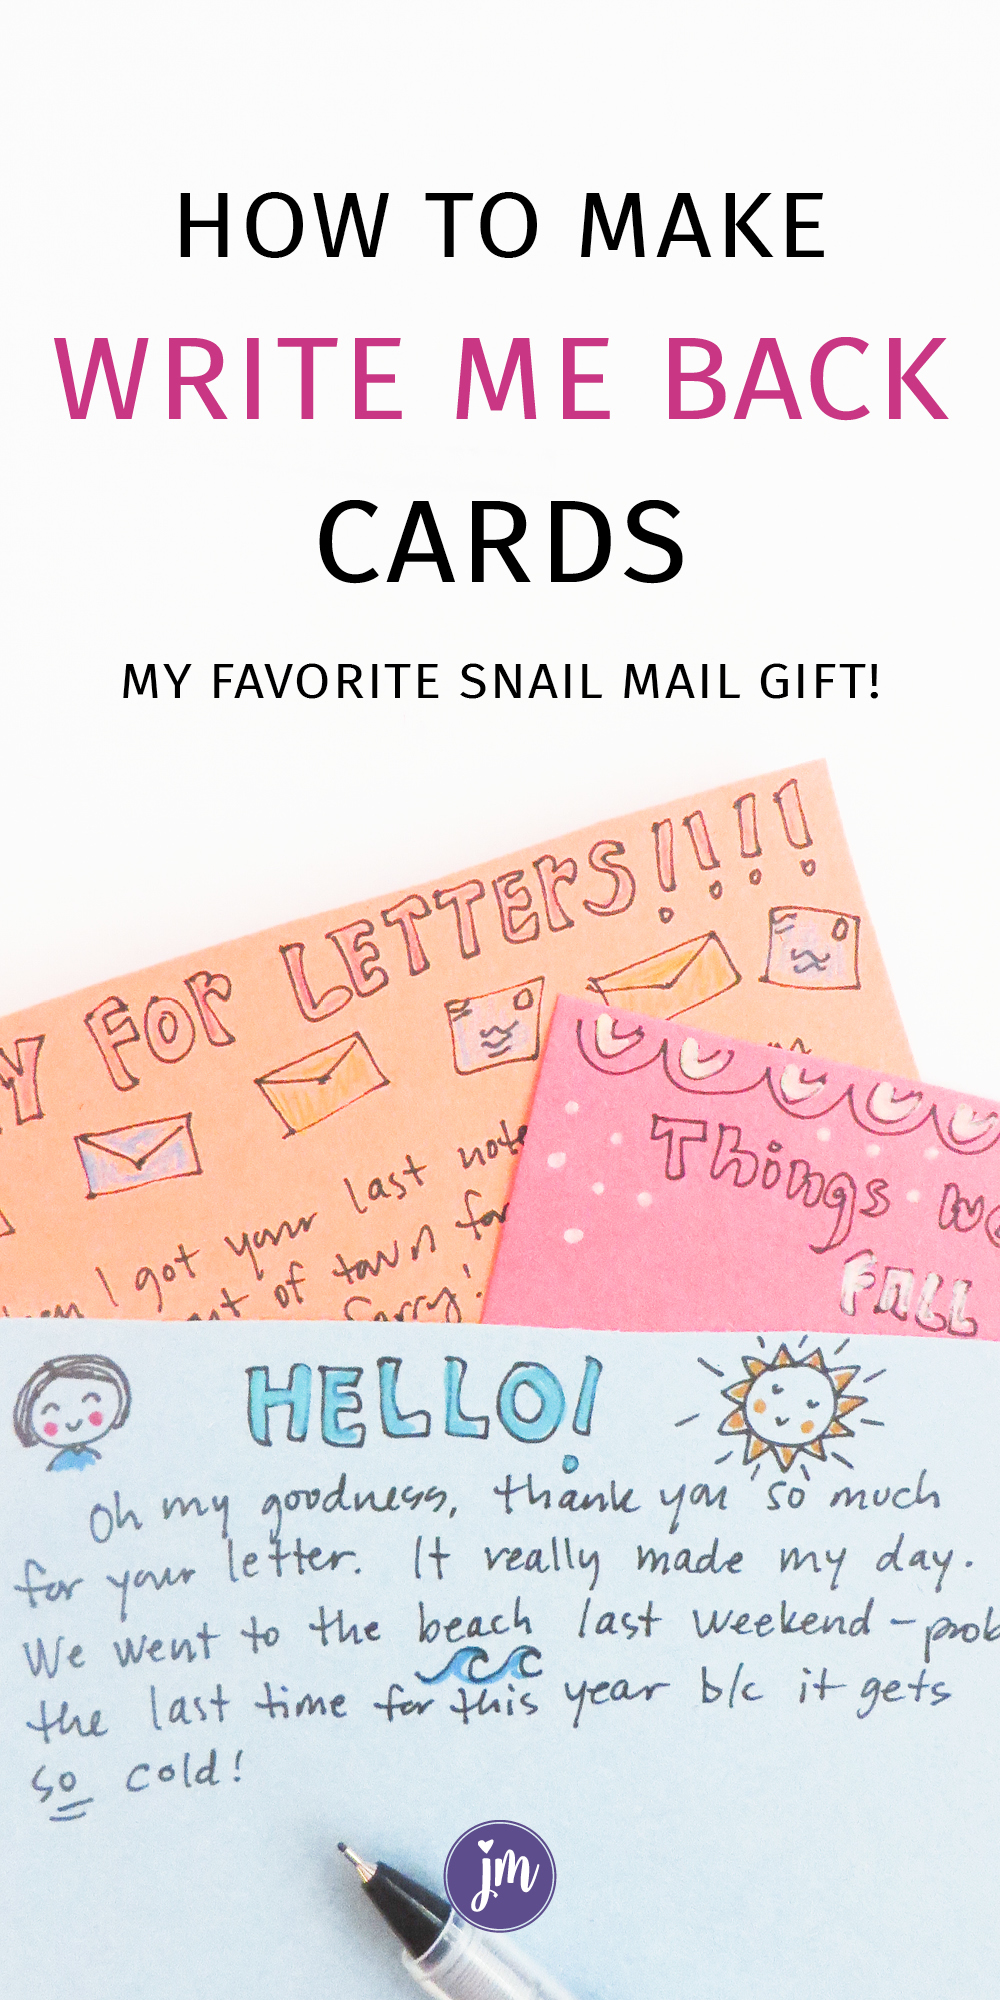 I LOVE these write me back cards! They are seriously one of my favorite snail mail and letter writing gifts ever. Great for best friends, boyfriends, grandkids . . . And it's simple and sweet too! #letterwriting